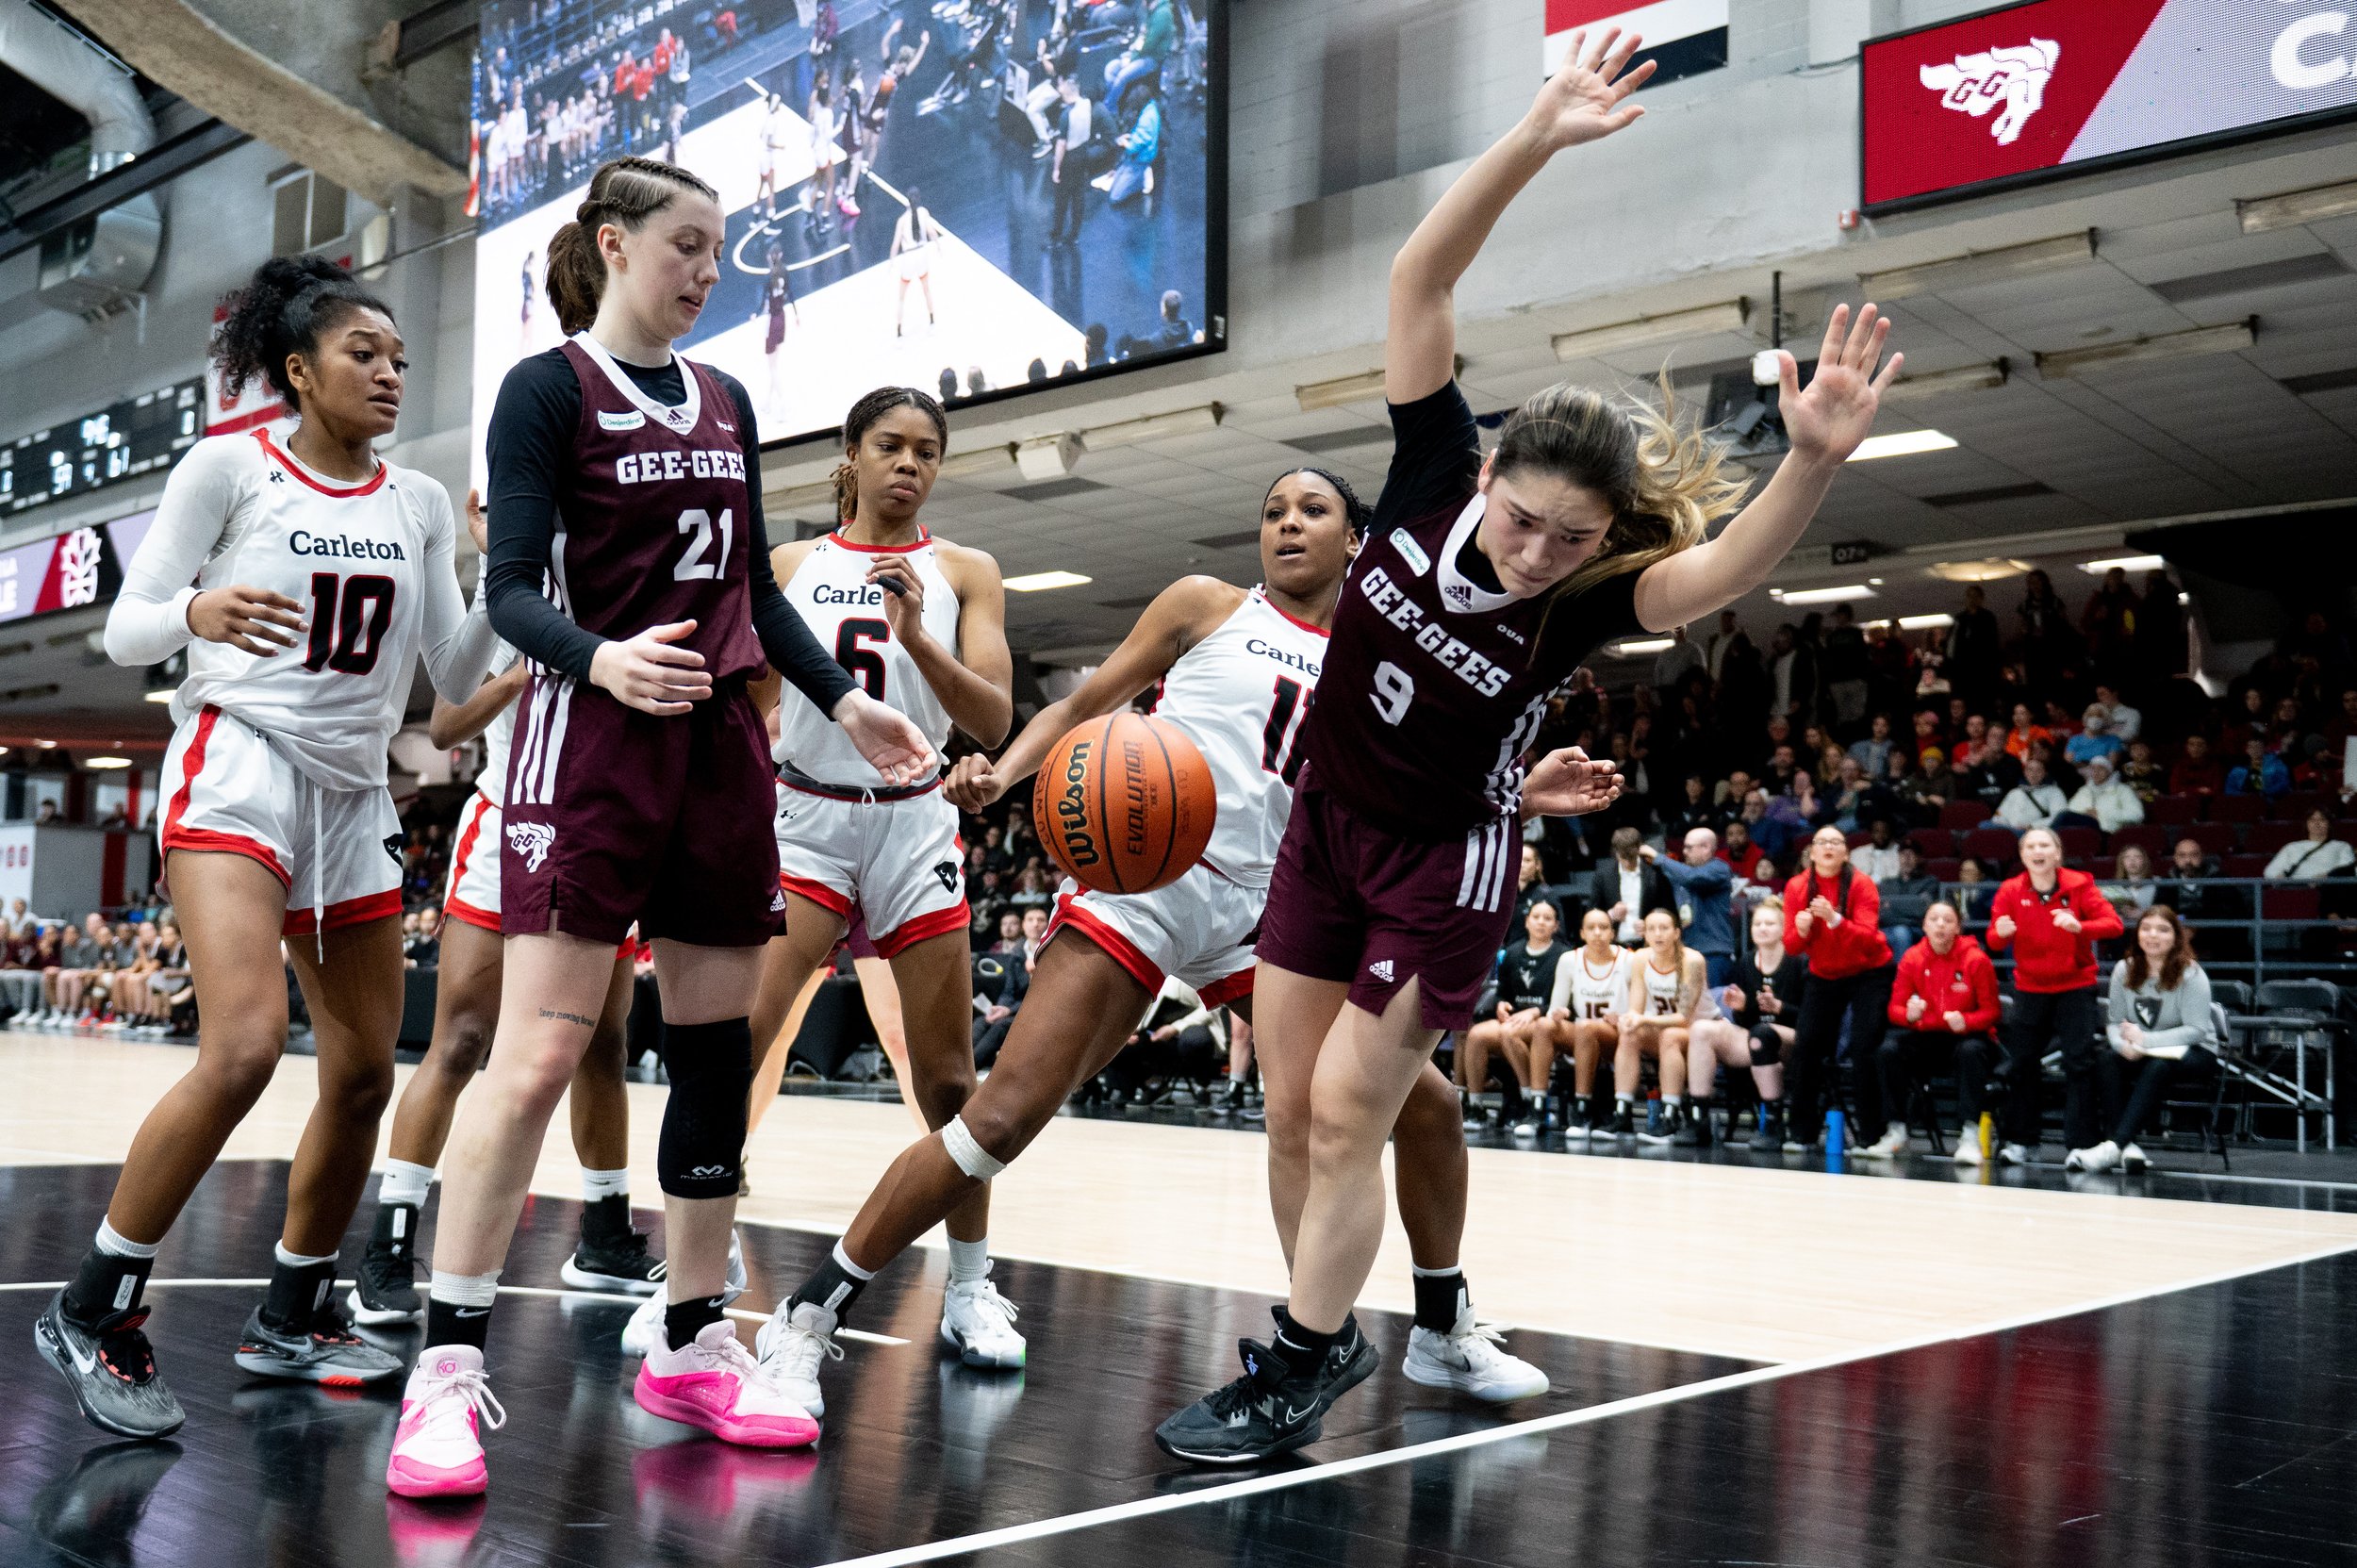  University of Ottawa Gee-Gees point guard Natsuki Szczokin (9) falls out of bounds as Carleton Ravens' guard Kyana-Jade Poulin (11) looks on during the second half of the annual Capital Hoops Classic rivalry game at TD Place in Ottawa, on Friday, Fe